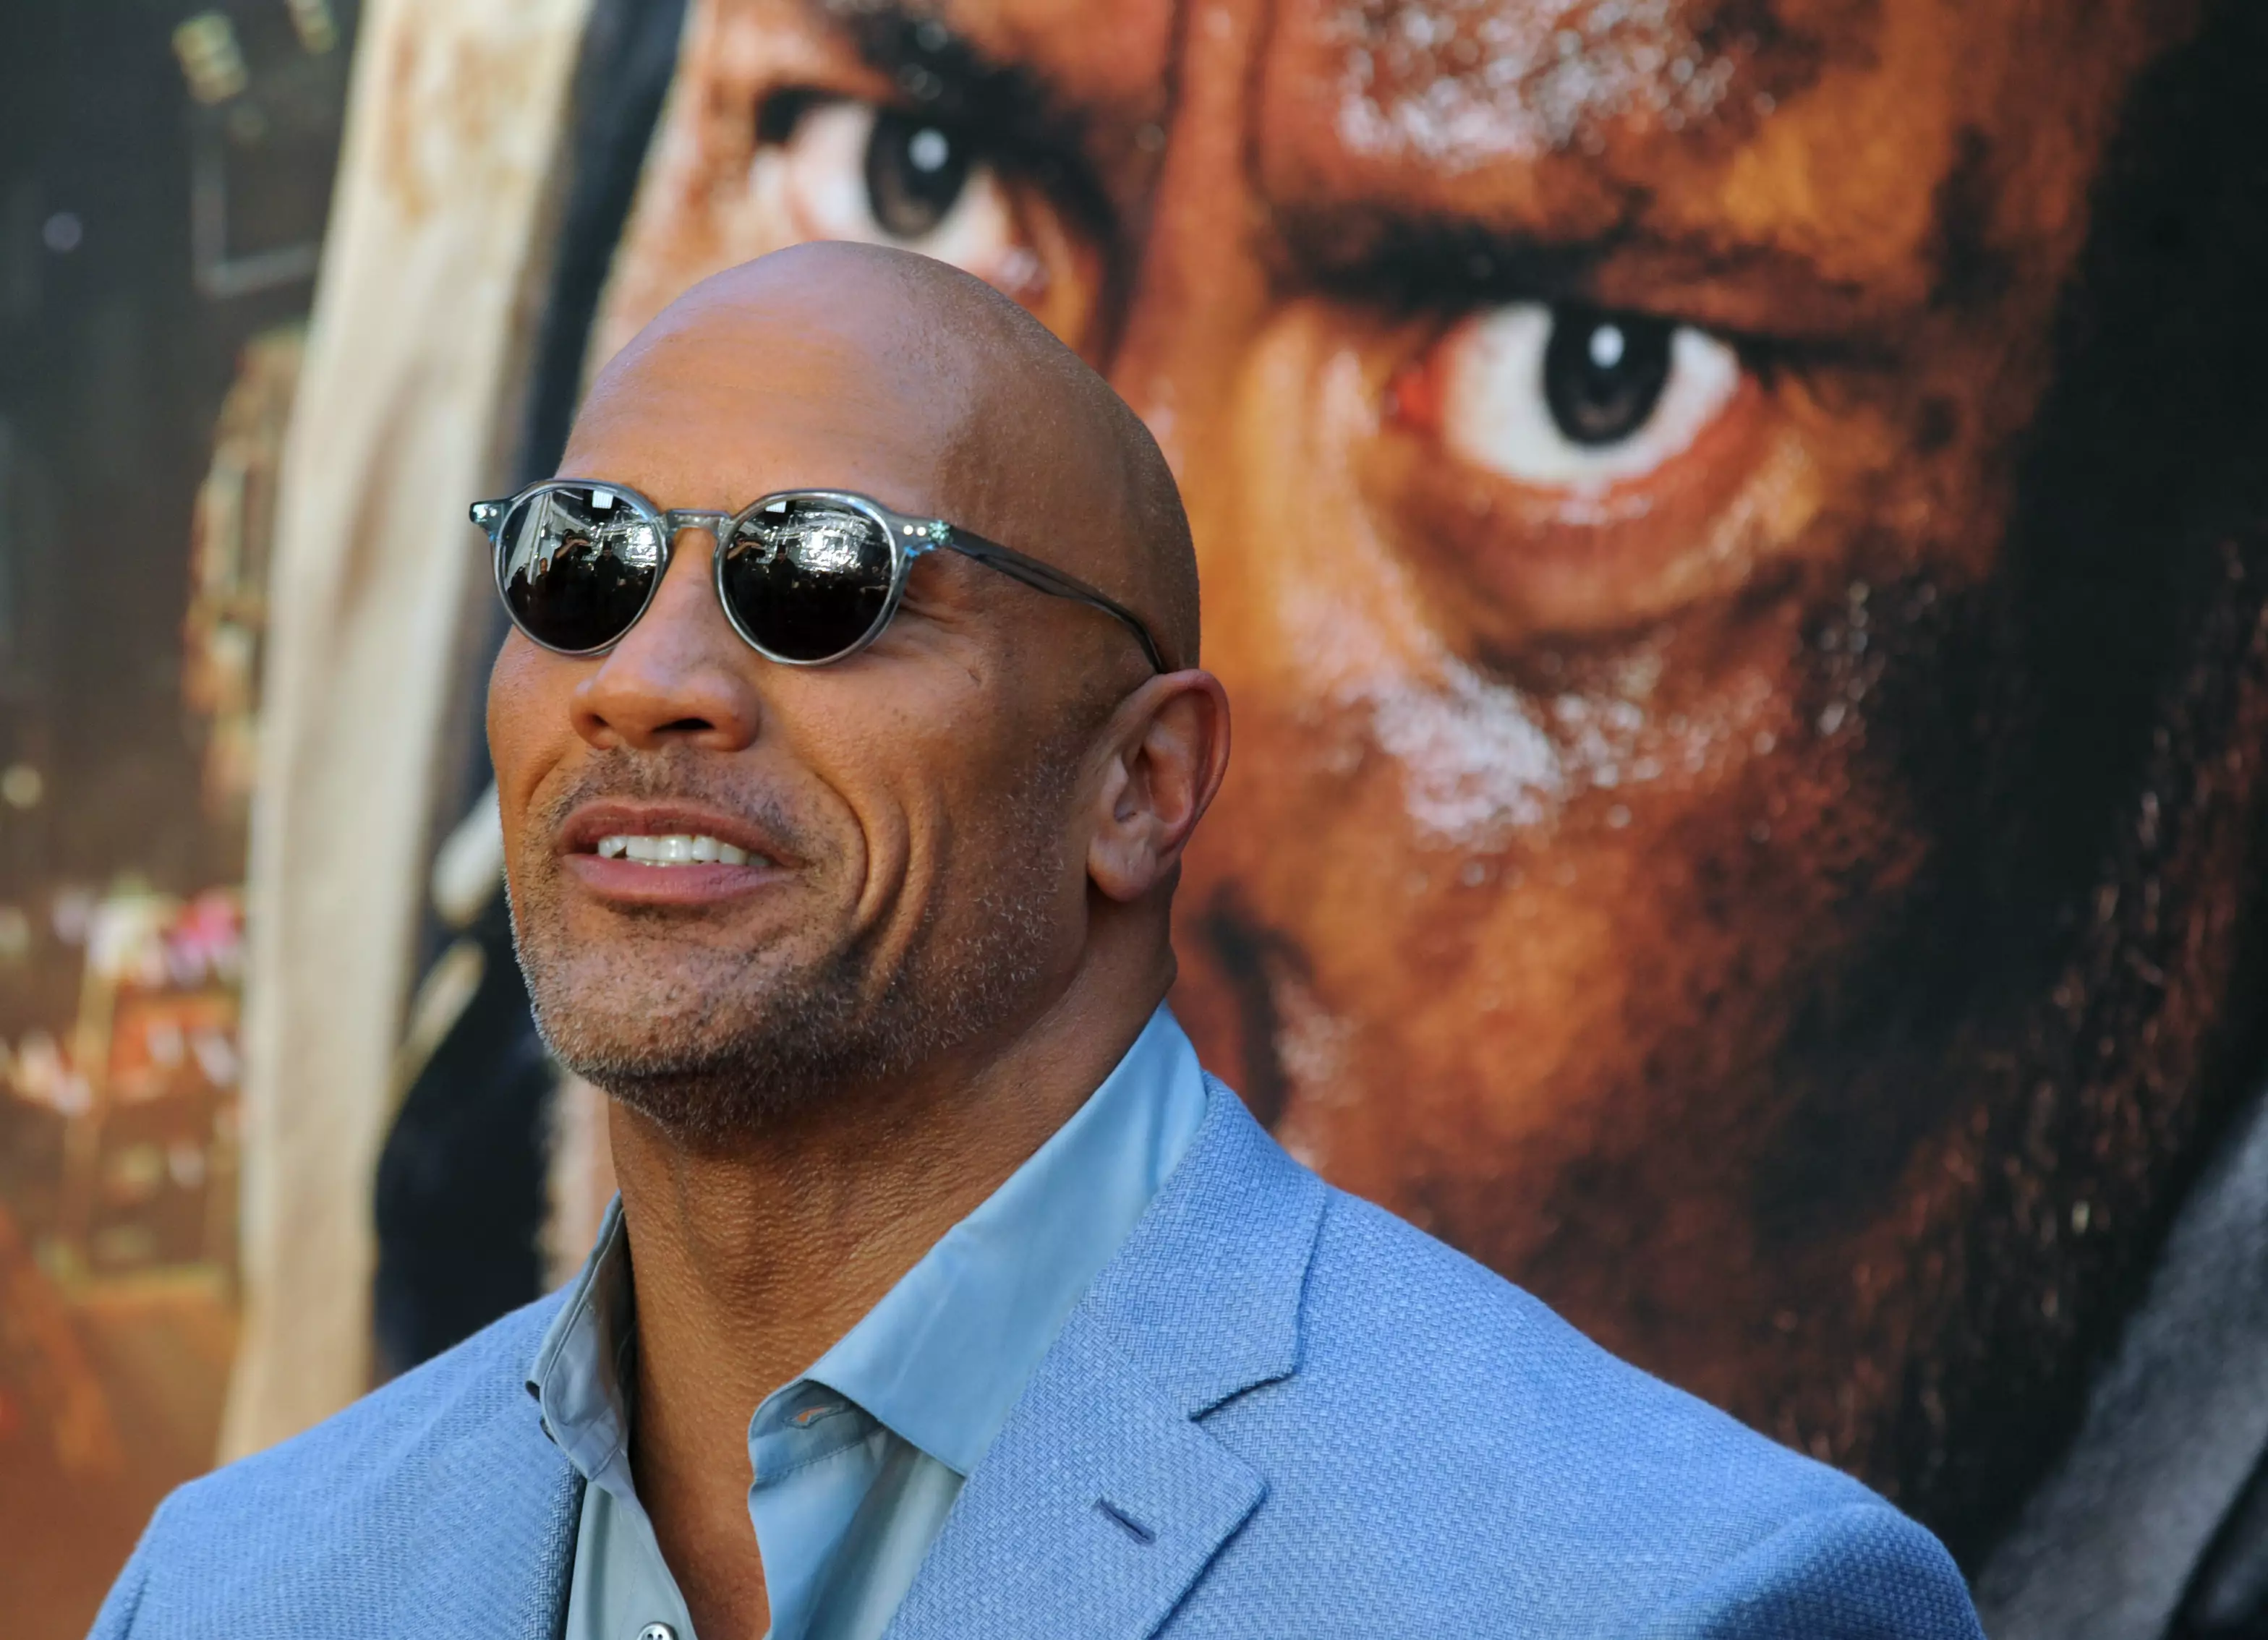 The Avengers Star Dwayne Johnson Tops Forbes Highest Paid Actor List.